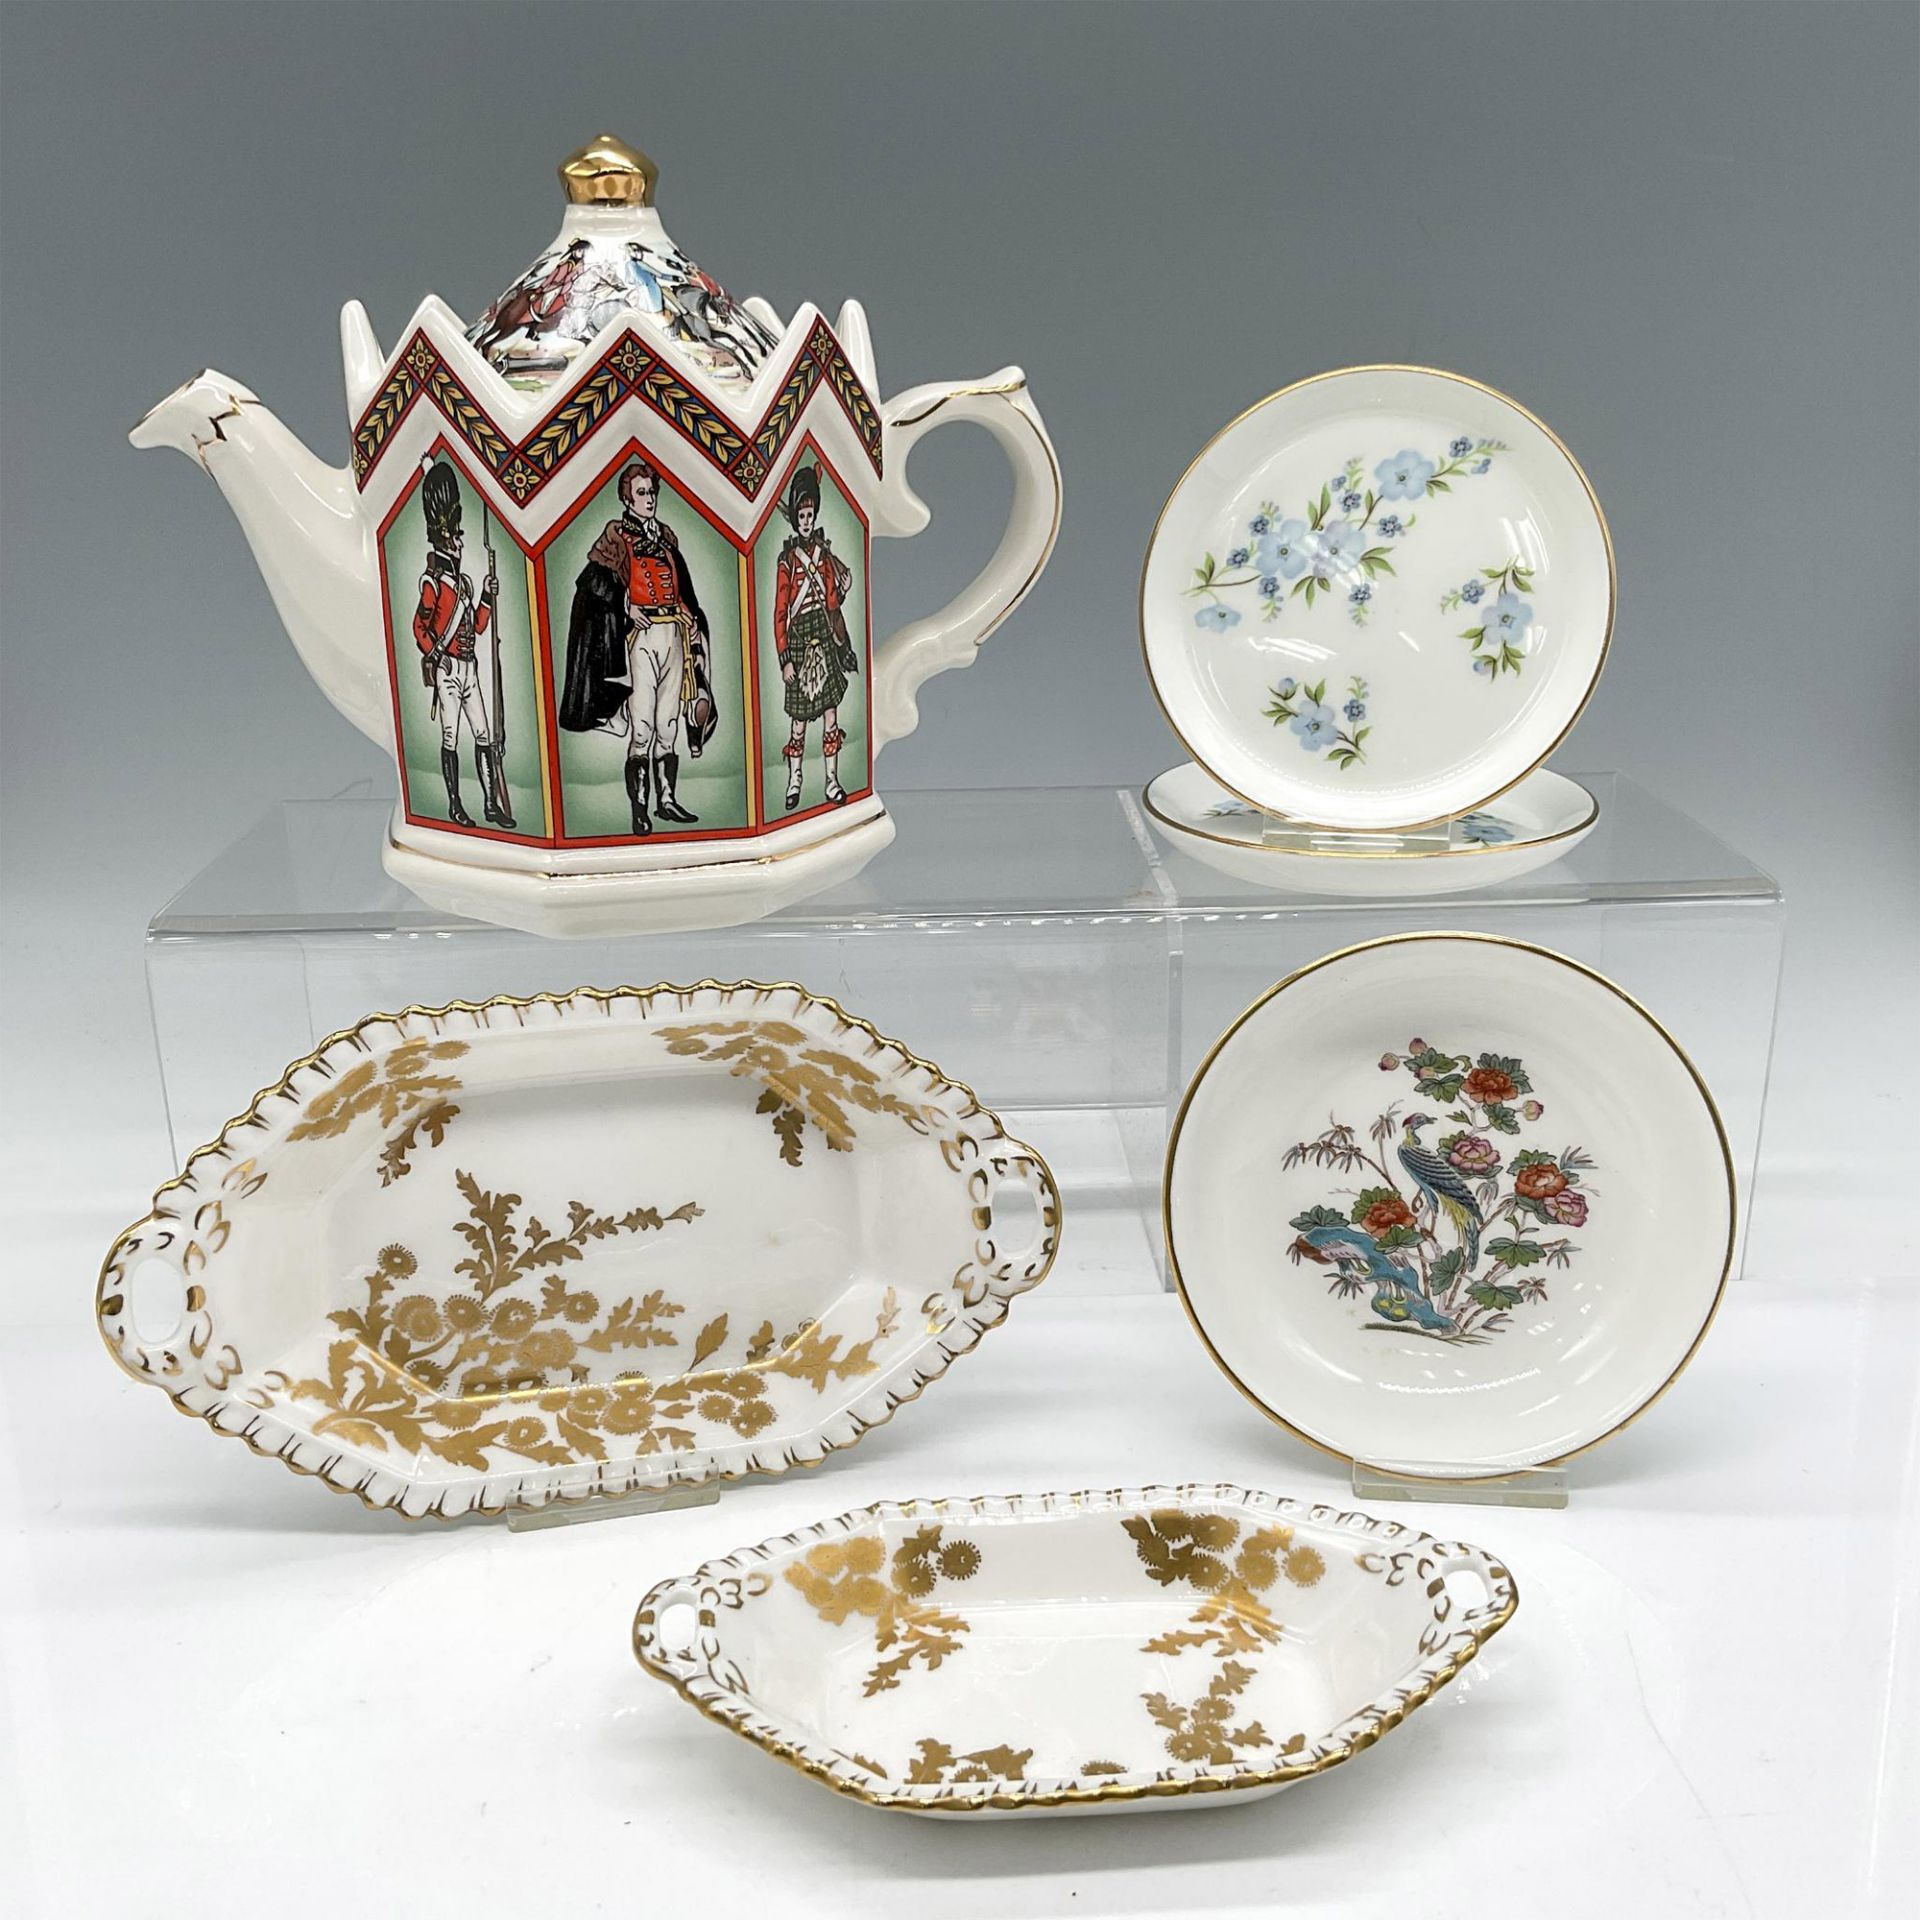 6pc English Porcelain and Bone China Teapot + Candy dishes - Image 2 of 3